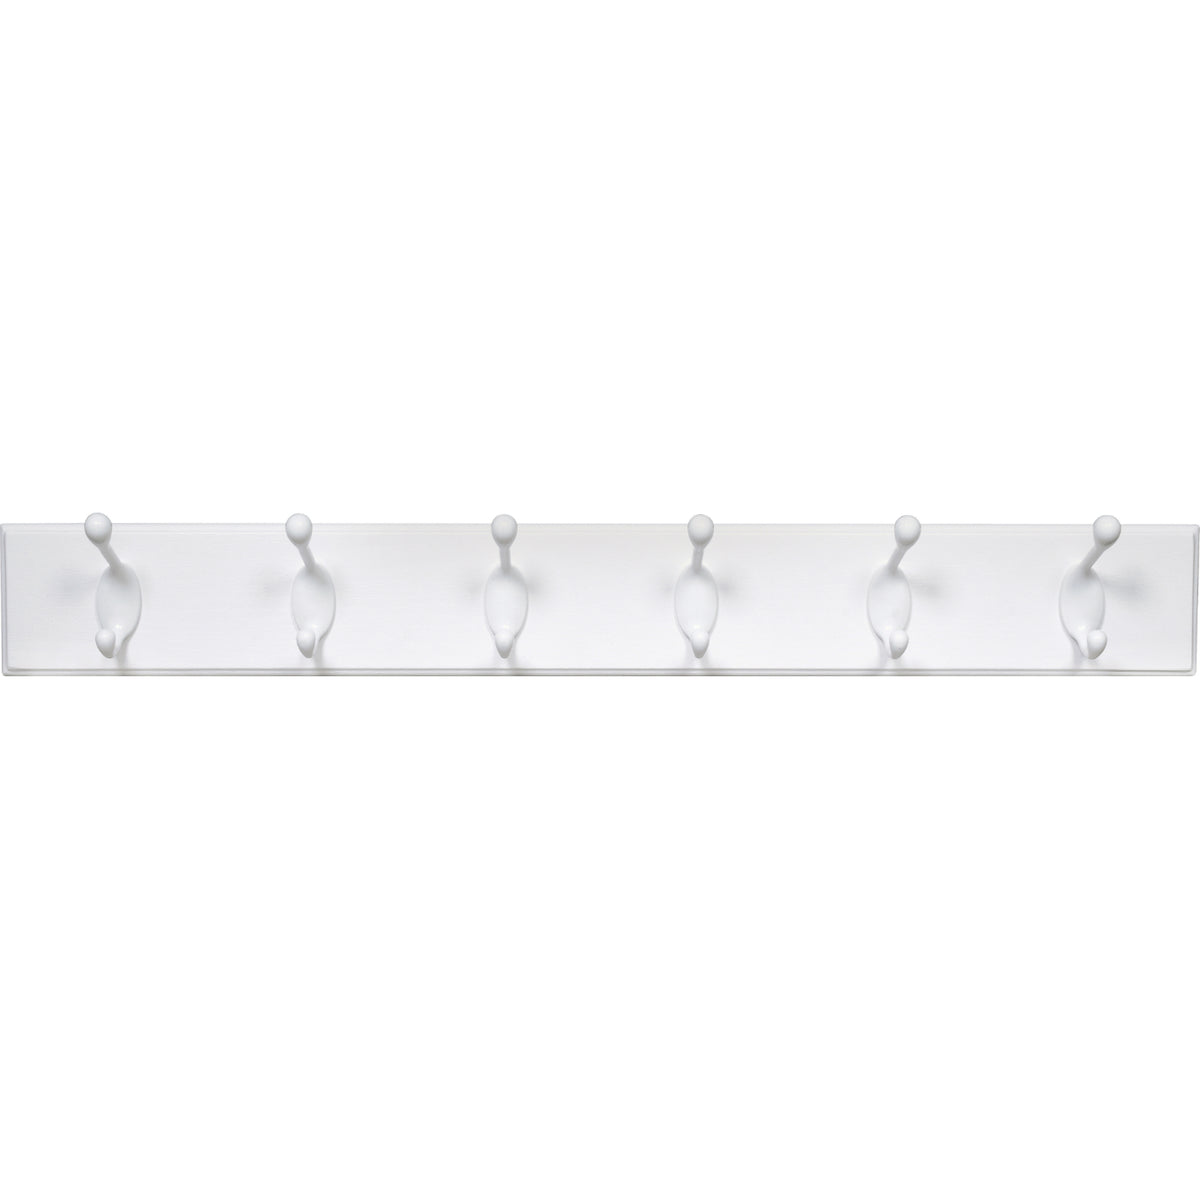 Hillman 515750 High & Mighty White Hook Rail with White Hooks, 27"